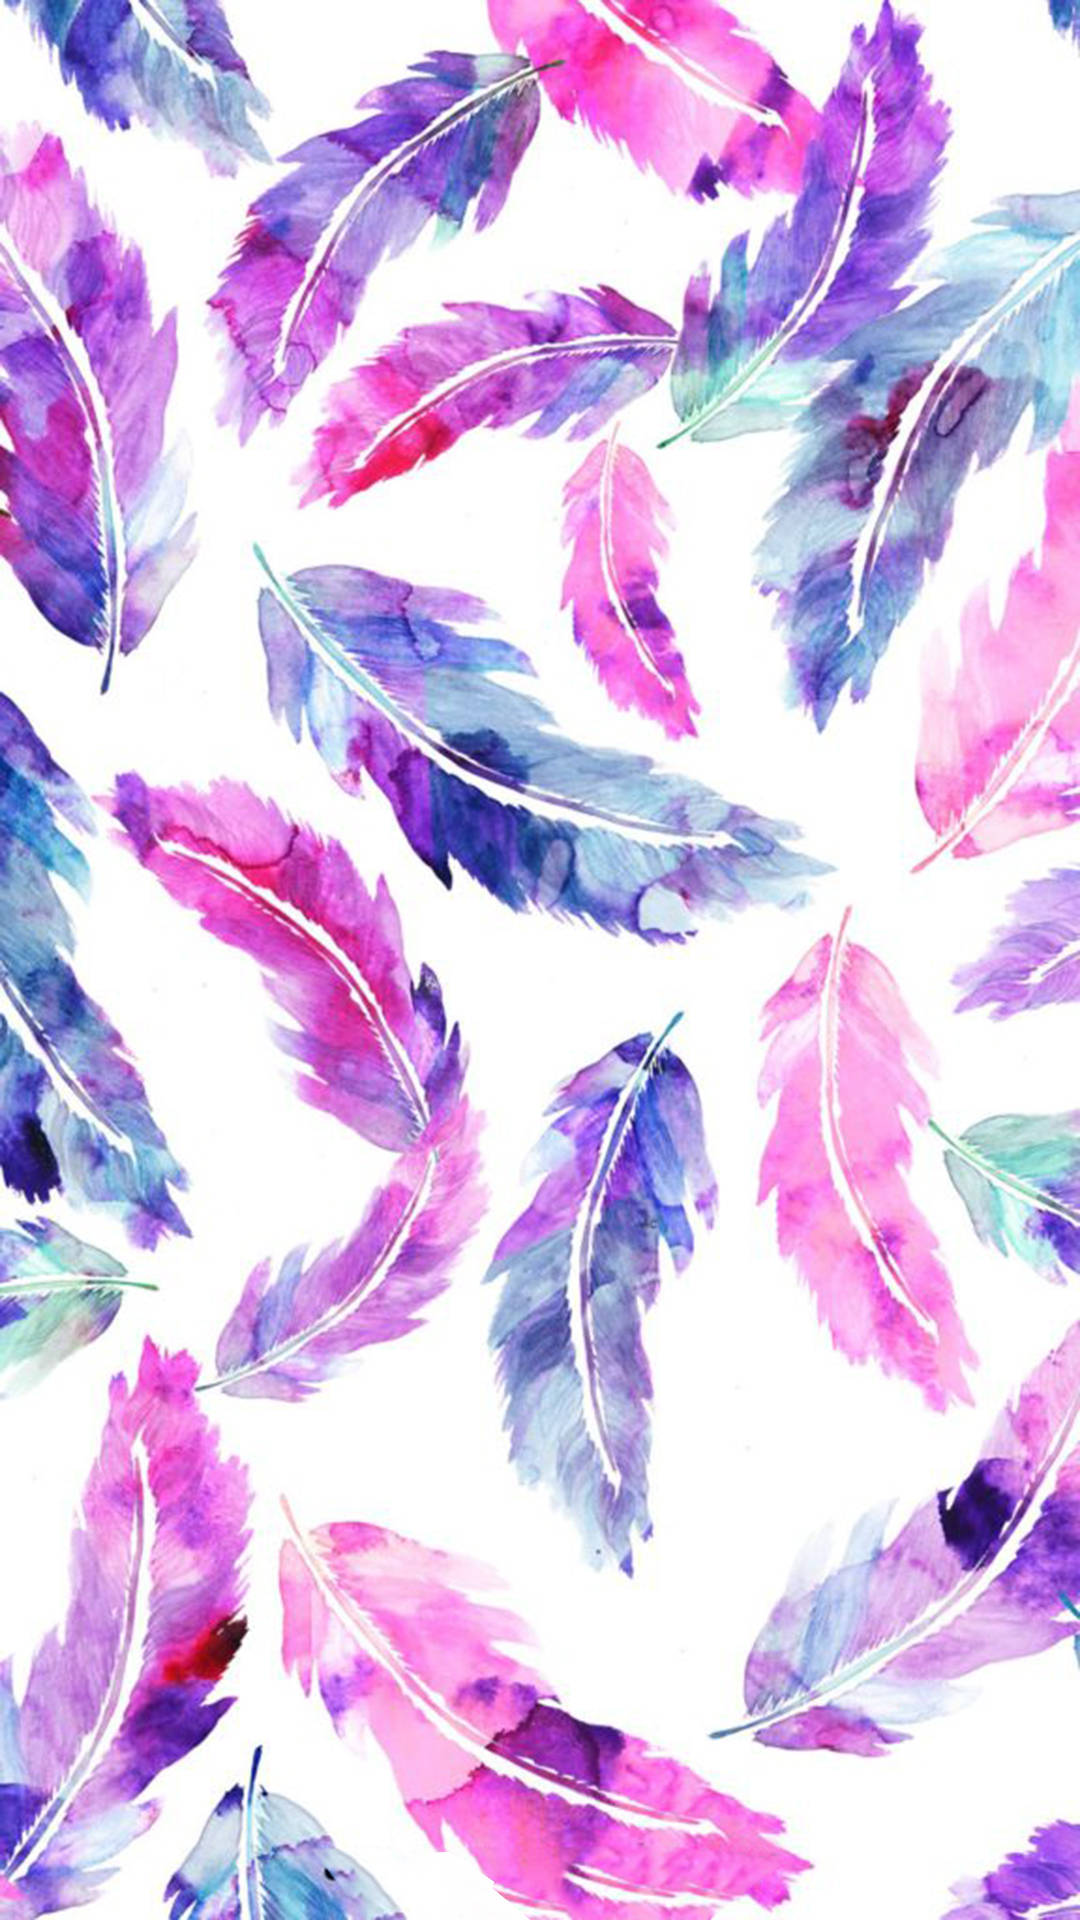 Instagram Story Watercolor Feathers Pattern